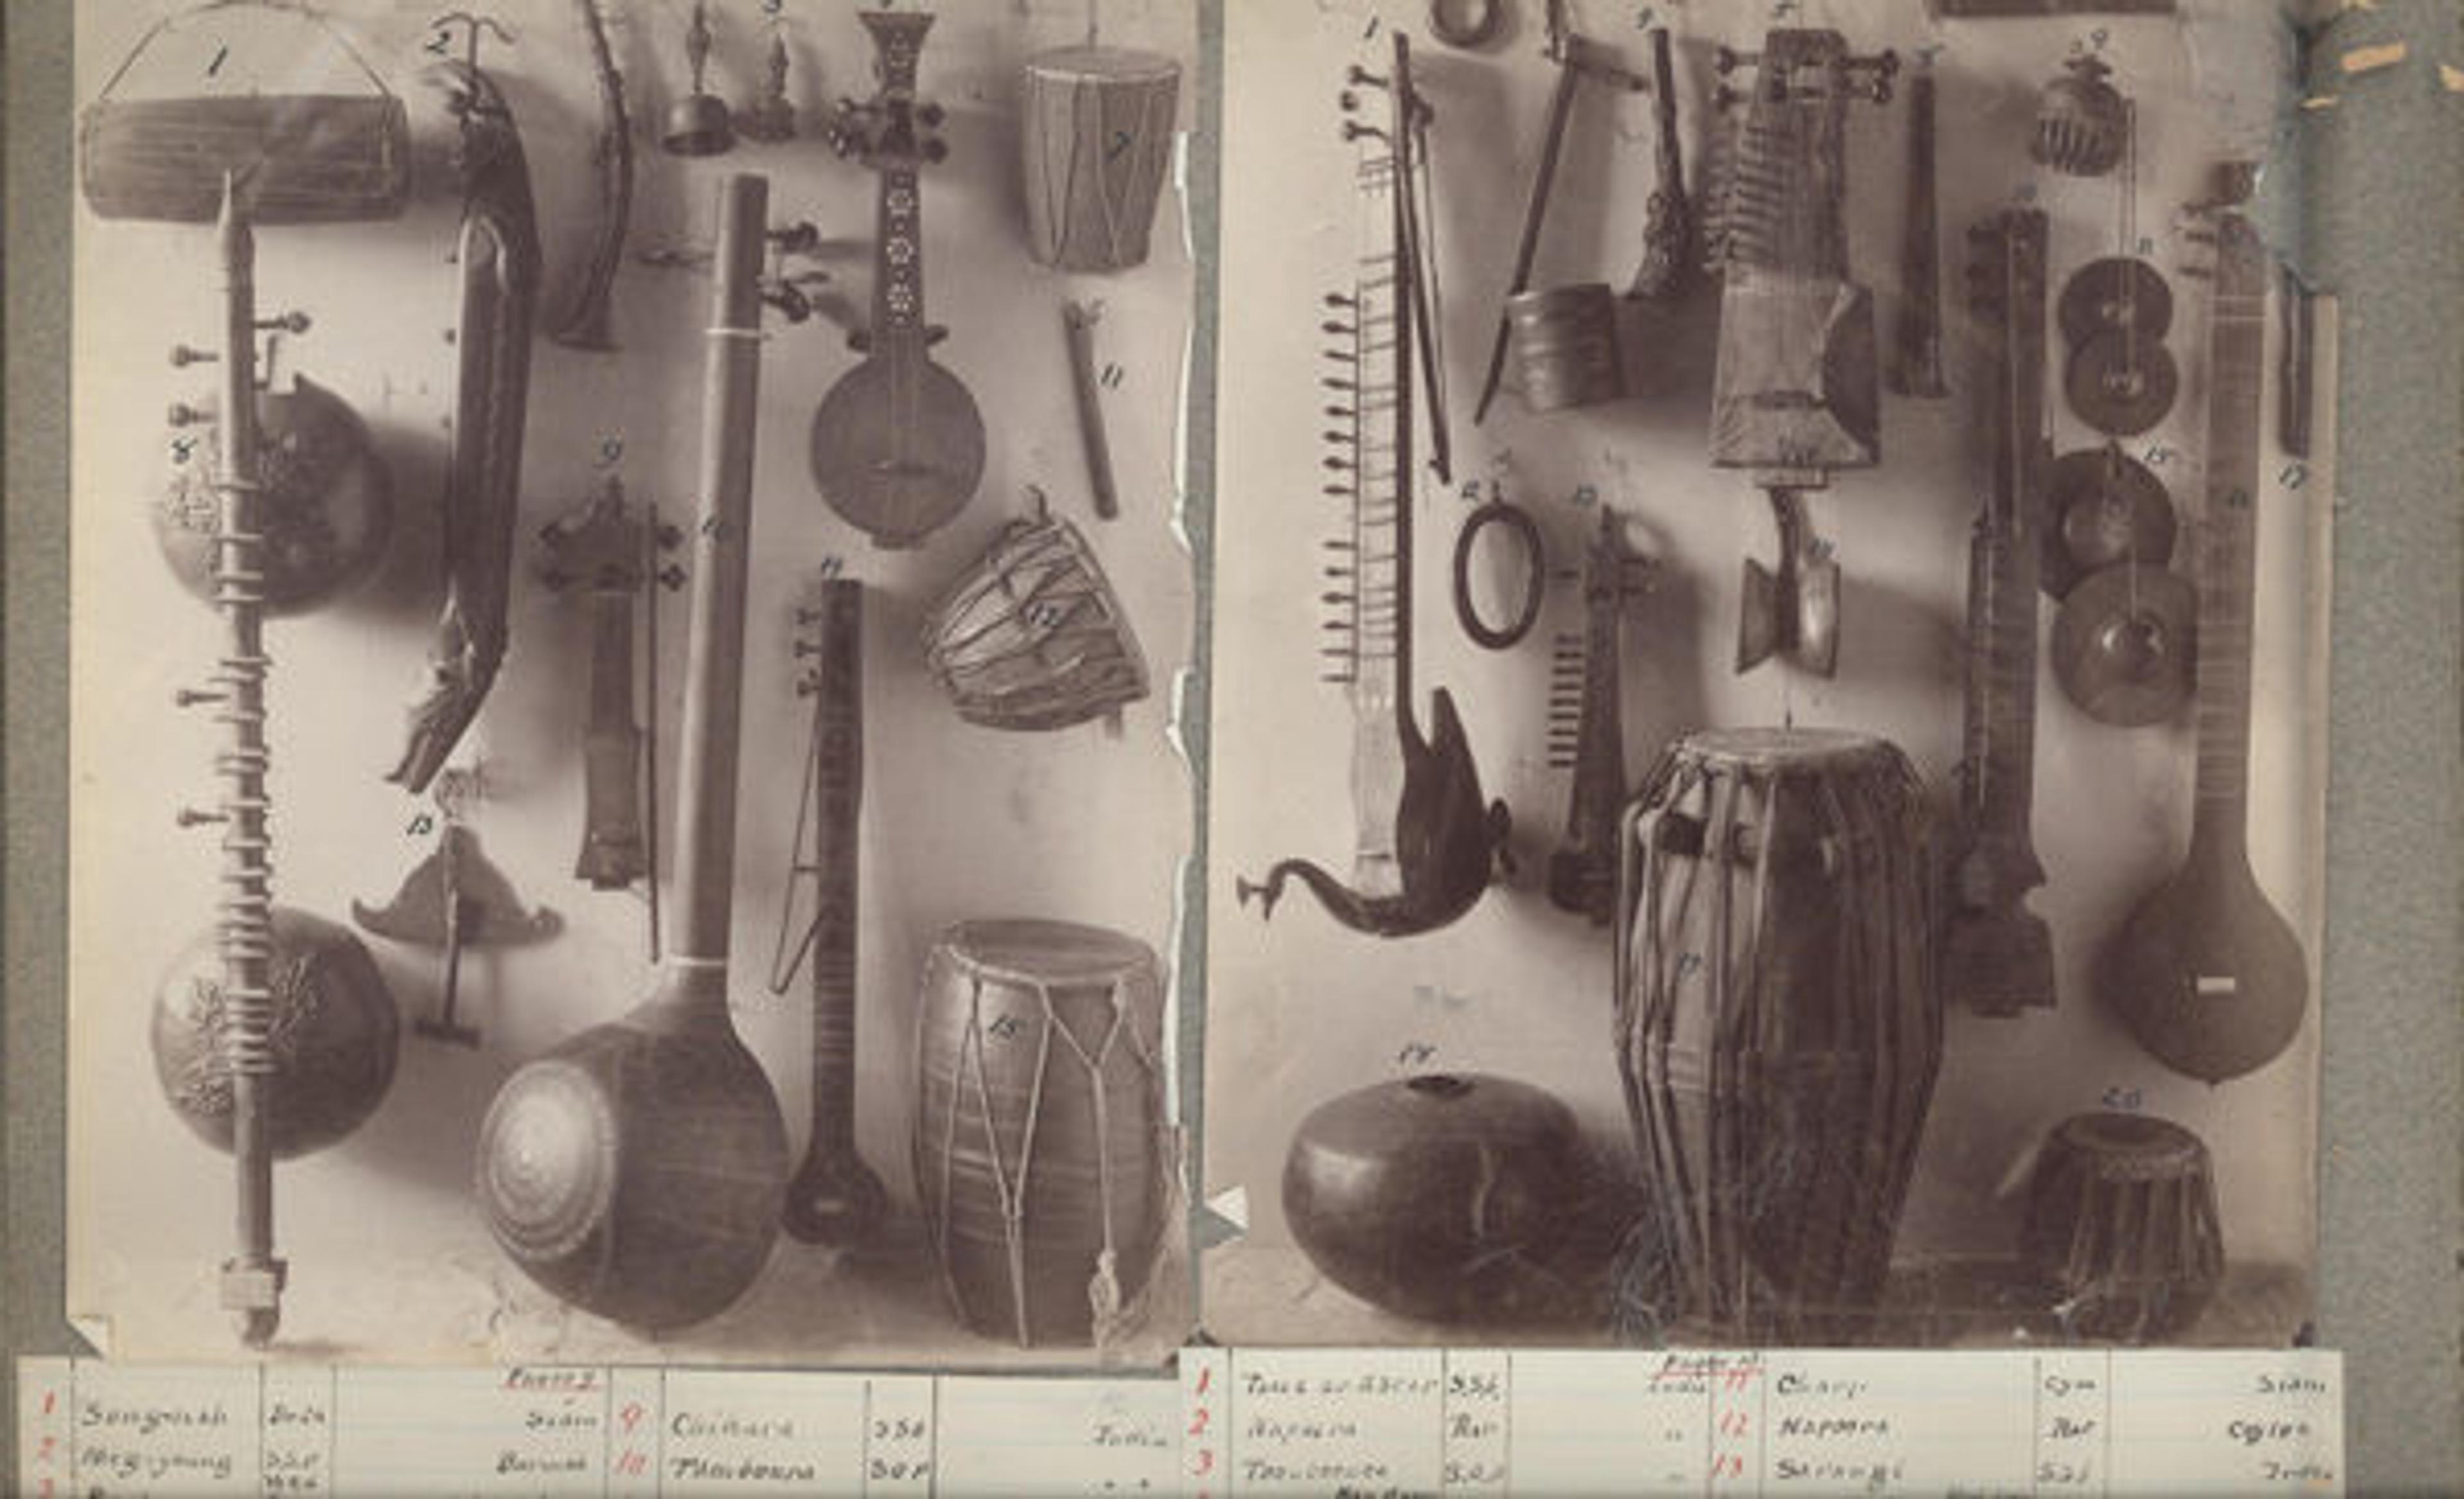 Although Frishmuth did not catalogue her collection, Edwin Hawley, custodian of the collection at the Smithsonian Institution (then the National Museum) from 1885–1918, photographed it and compiled a list for an album now at the Met.